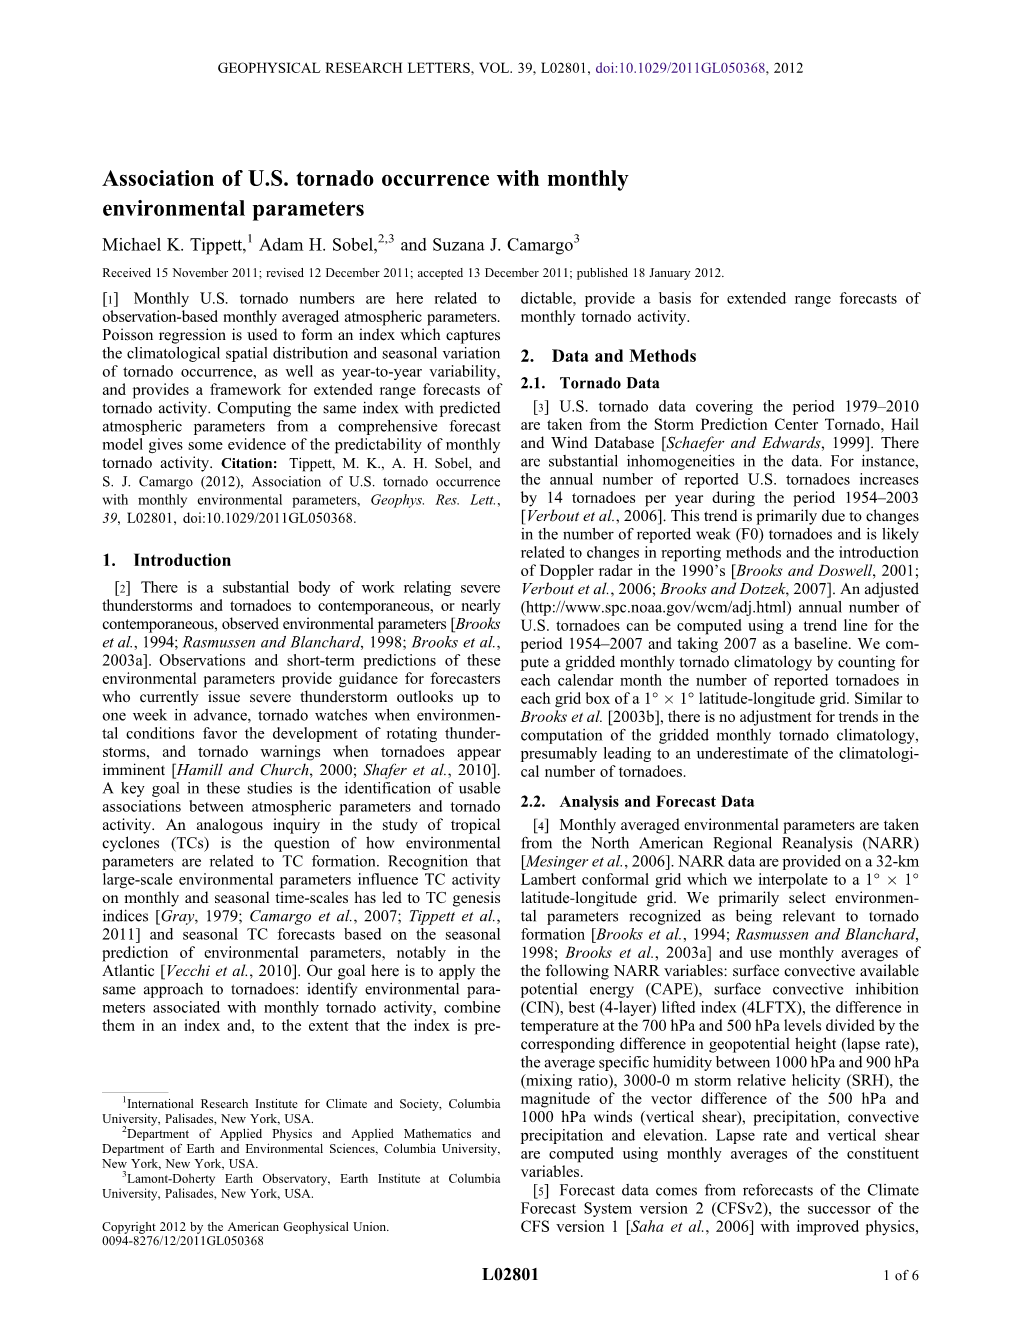 Association of U.S. Tornado Occurrence with Monthly Environmental Parameters Michael K